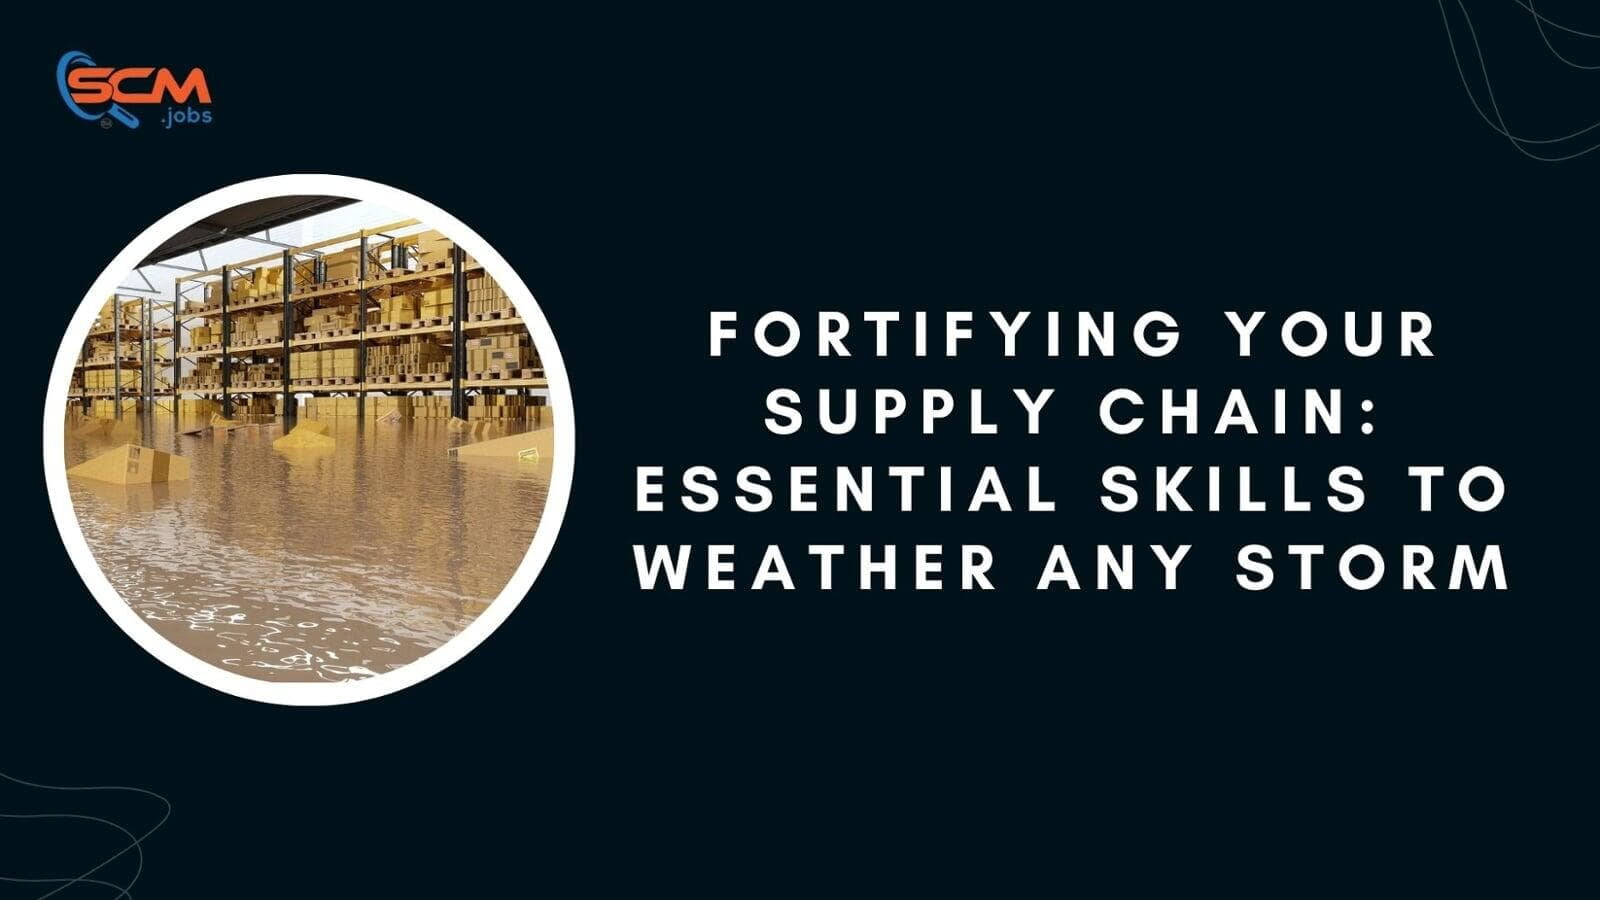 Fortifying Your Supply Chain: Essential Skills to Weather Any Storm